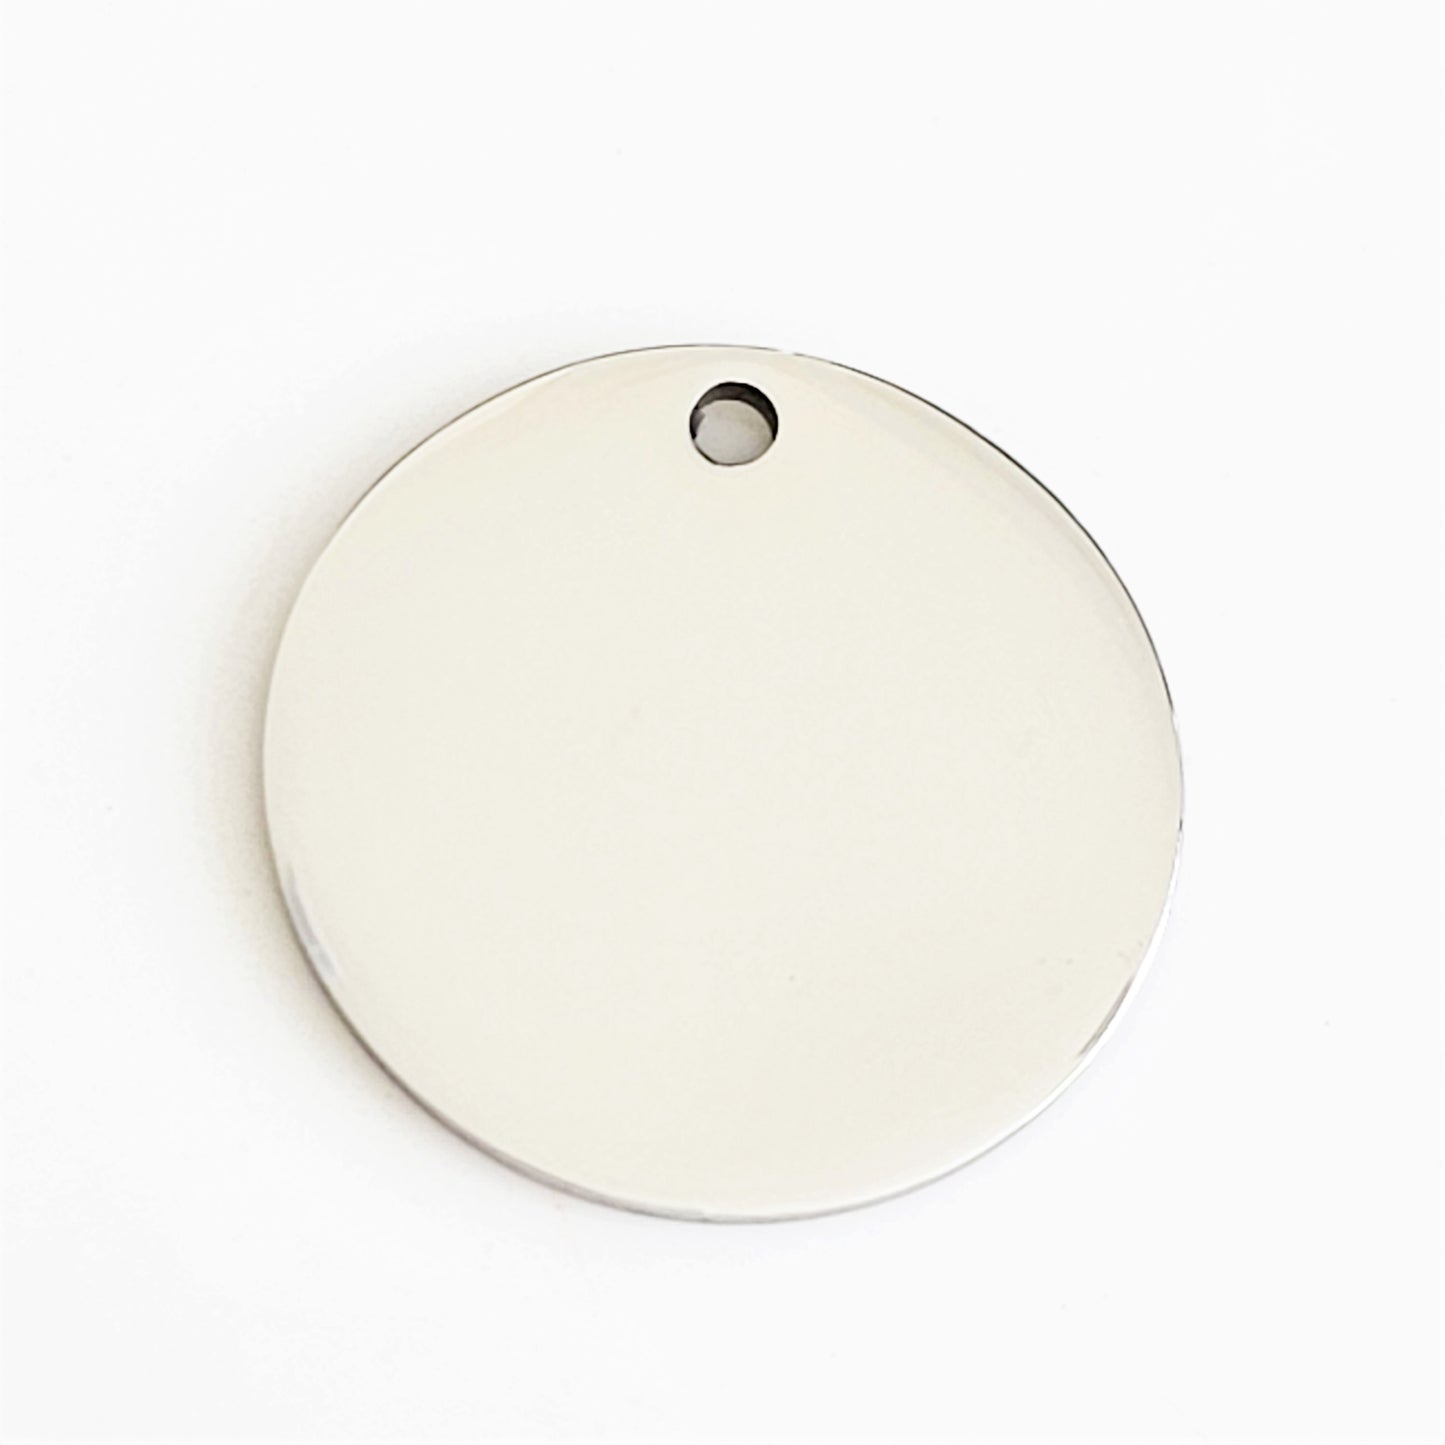 Stainless Steel - 1" Circle (with hole)